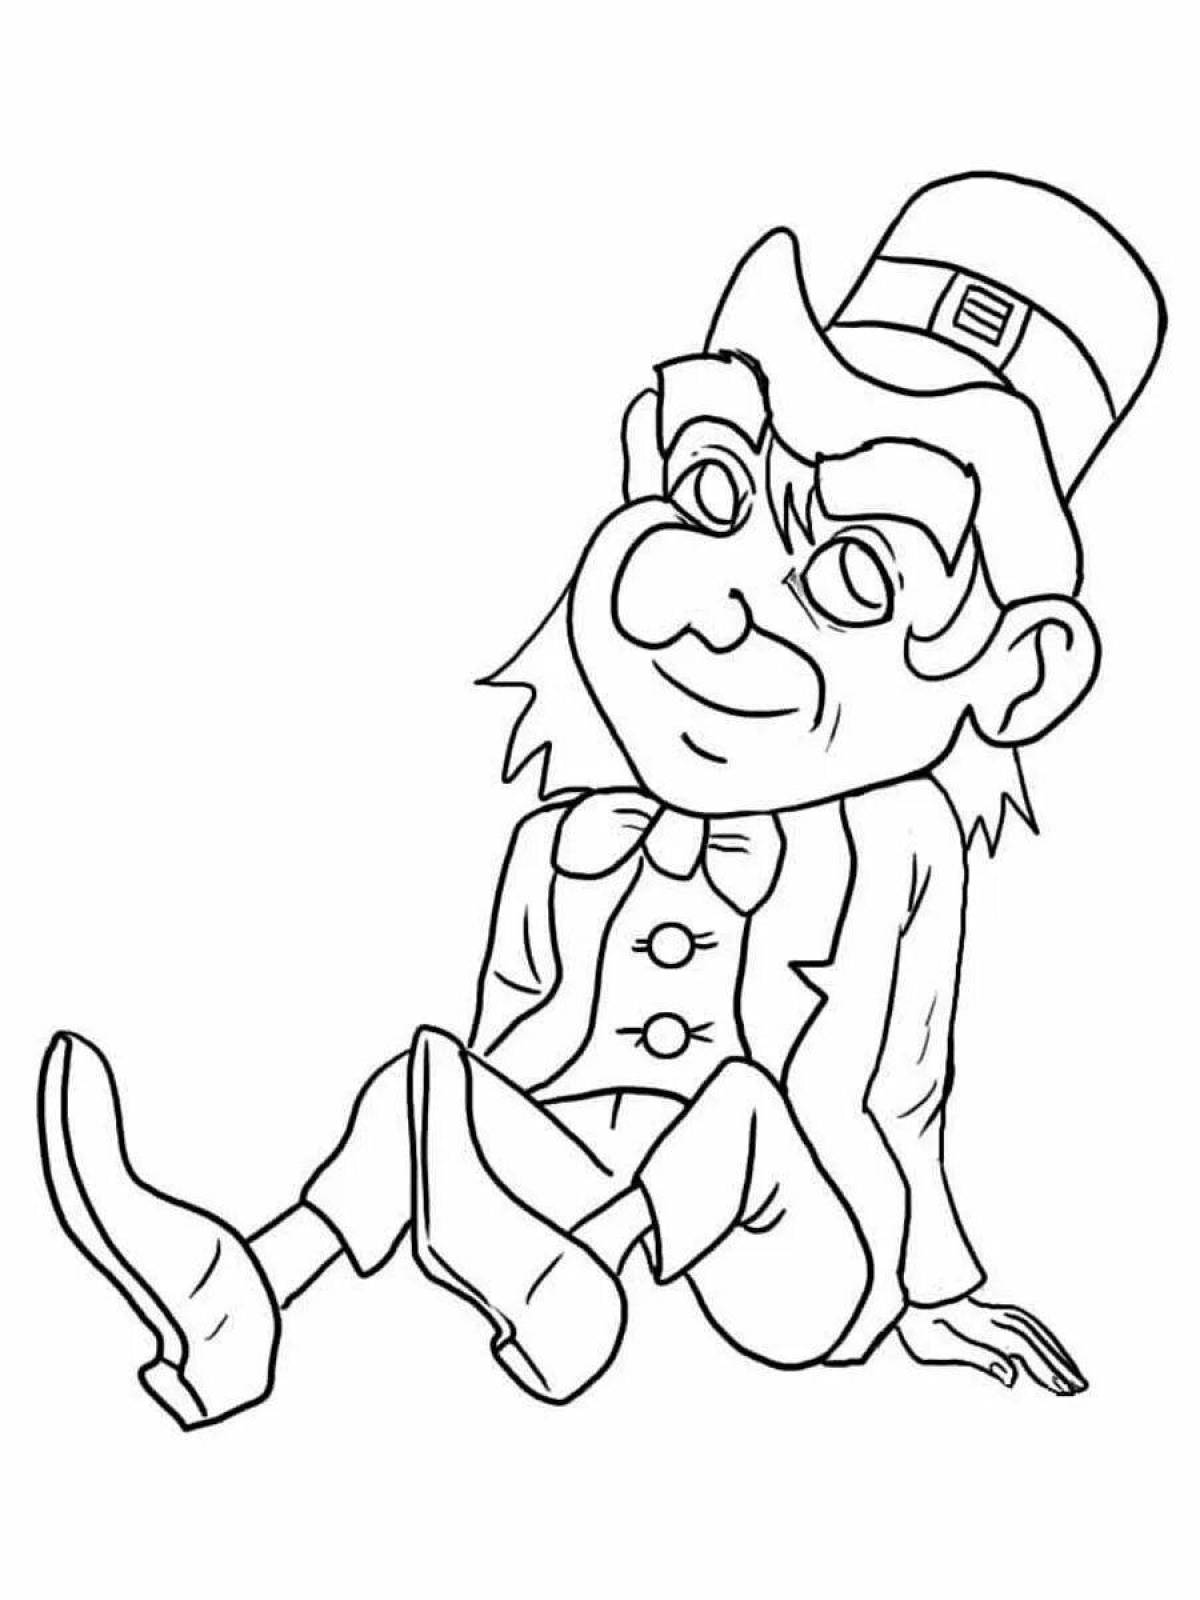 Coloring page witty leprechaun